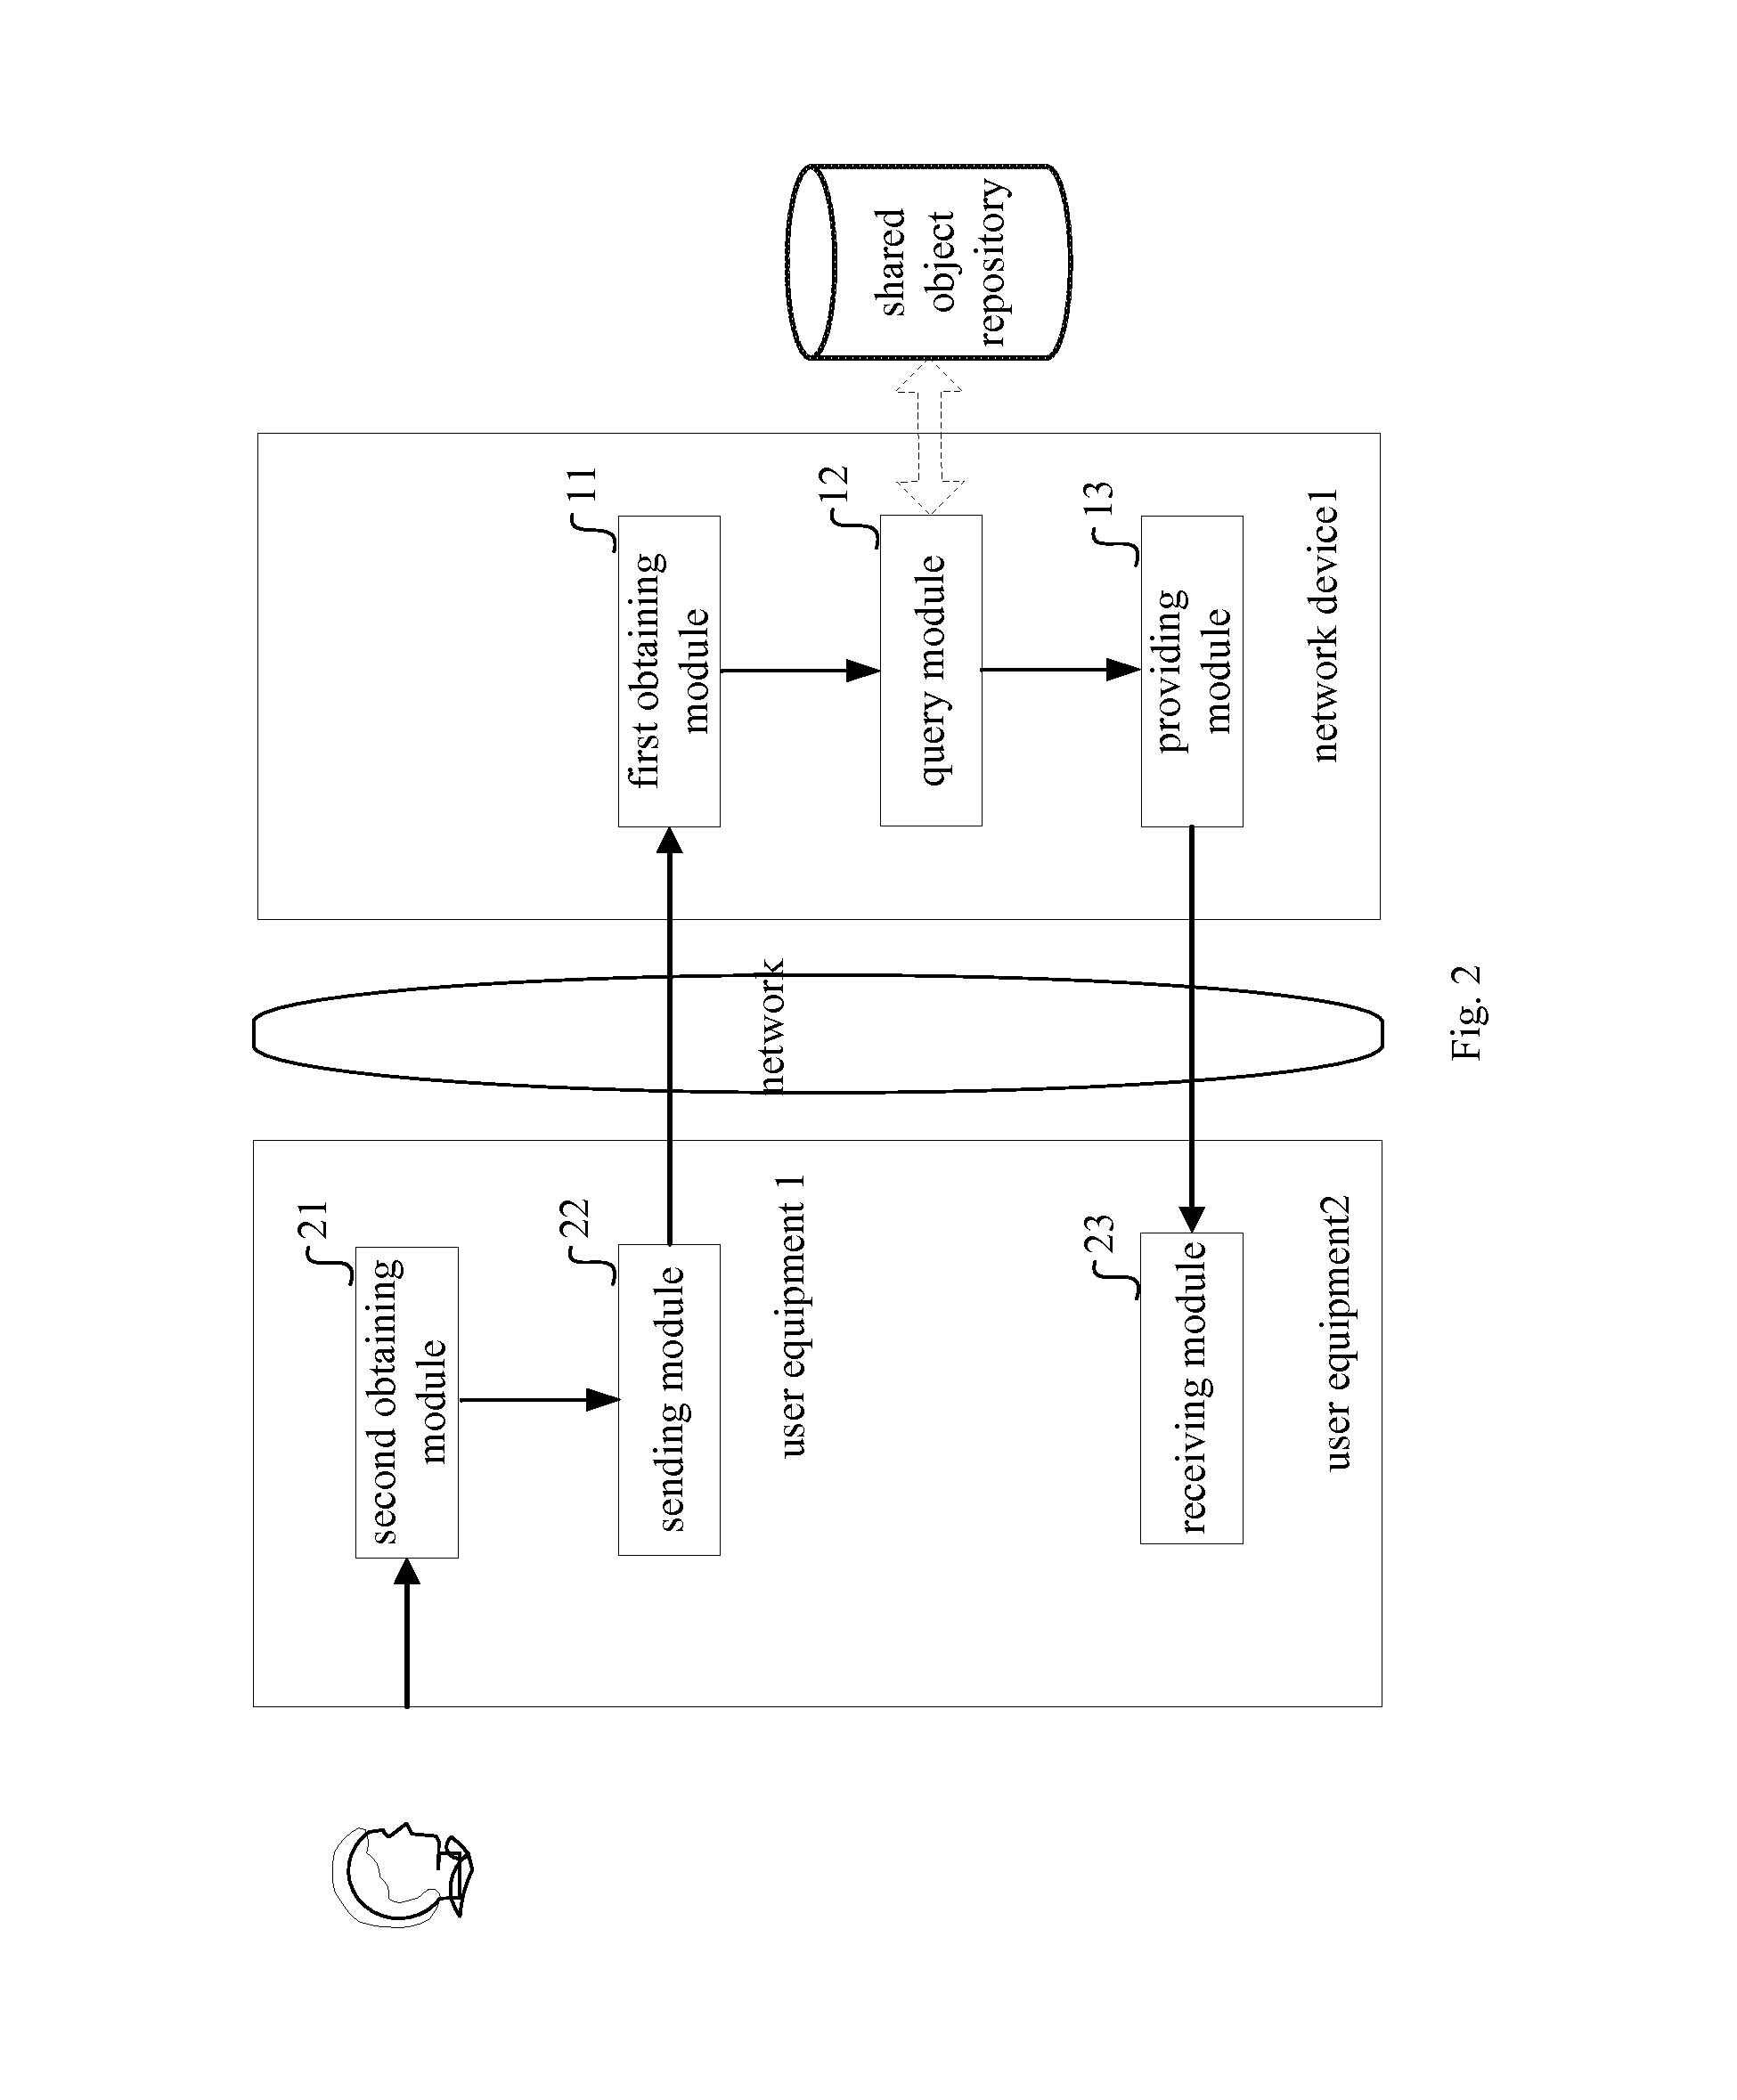 Device and Method for Obtaining Shared Object Related to Real Scene